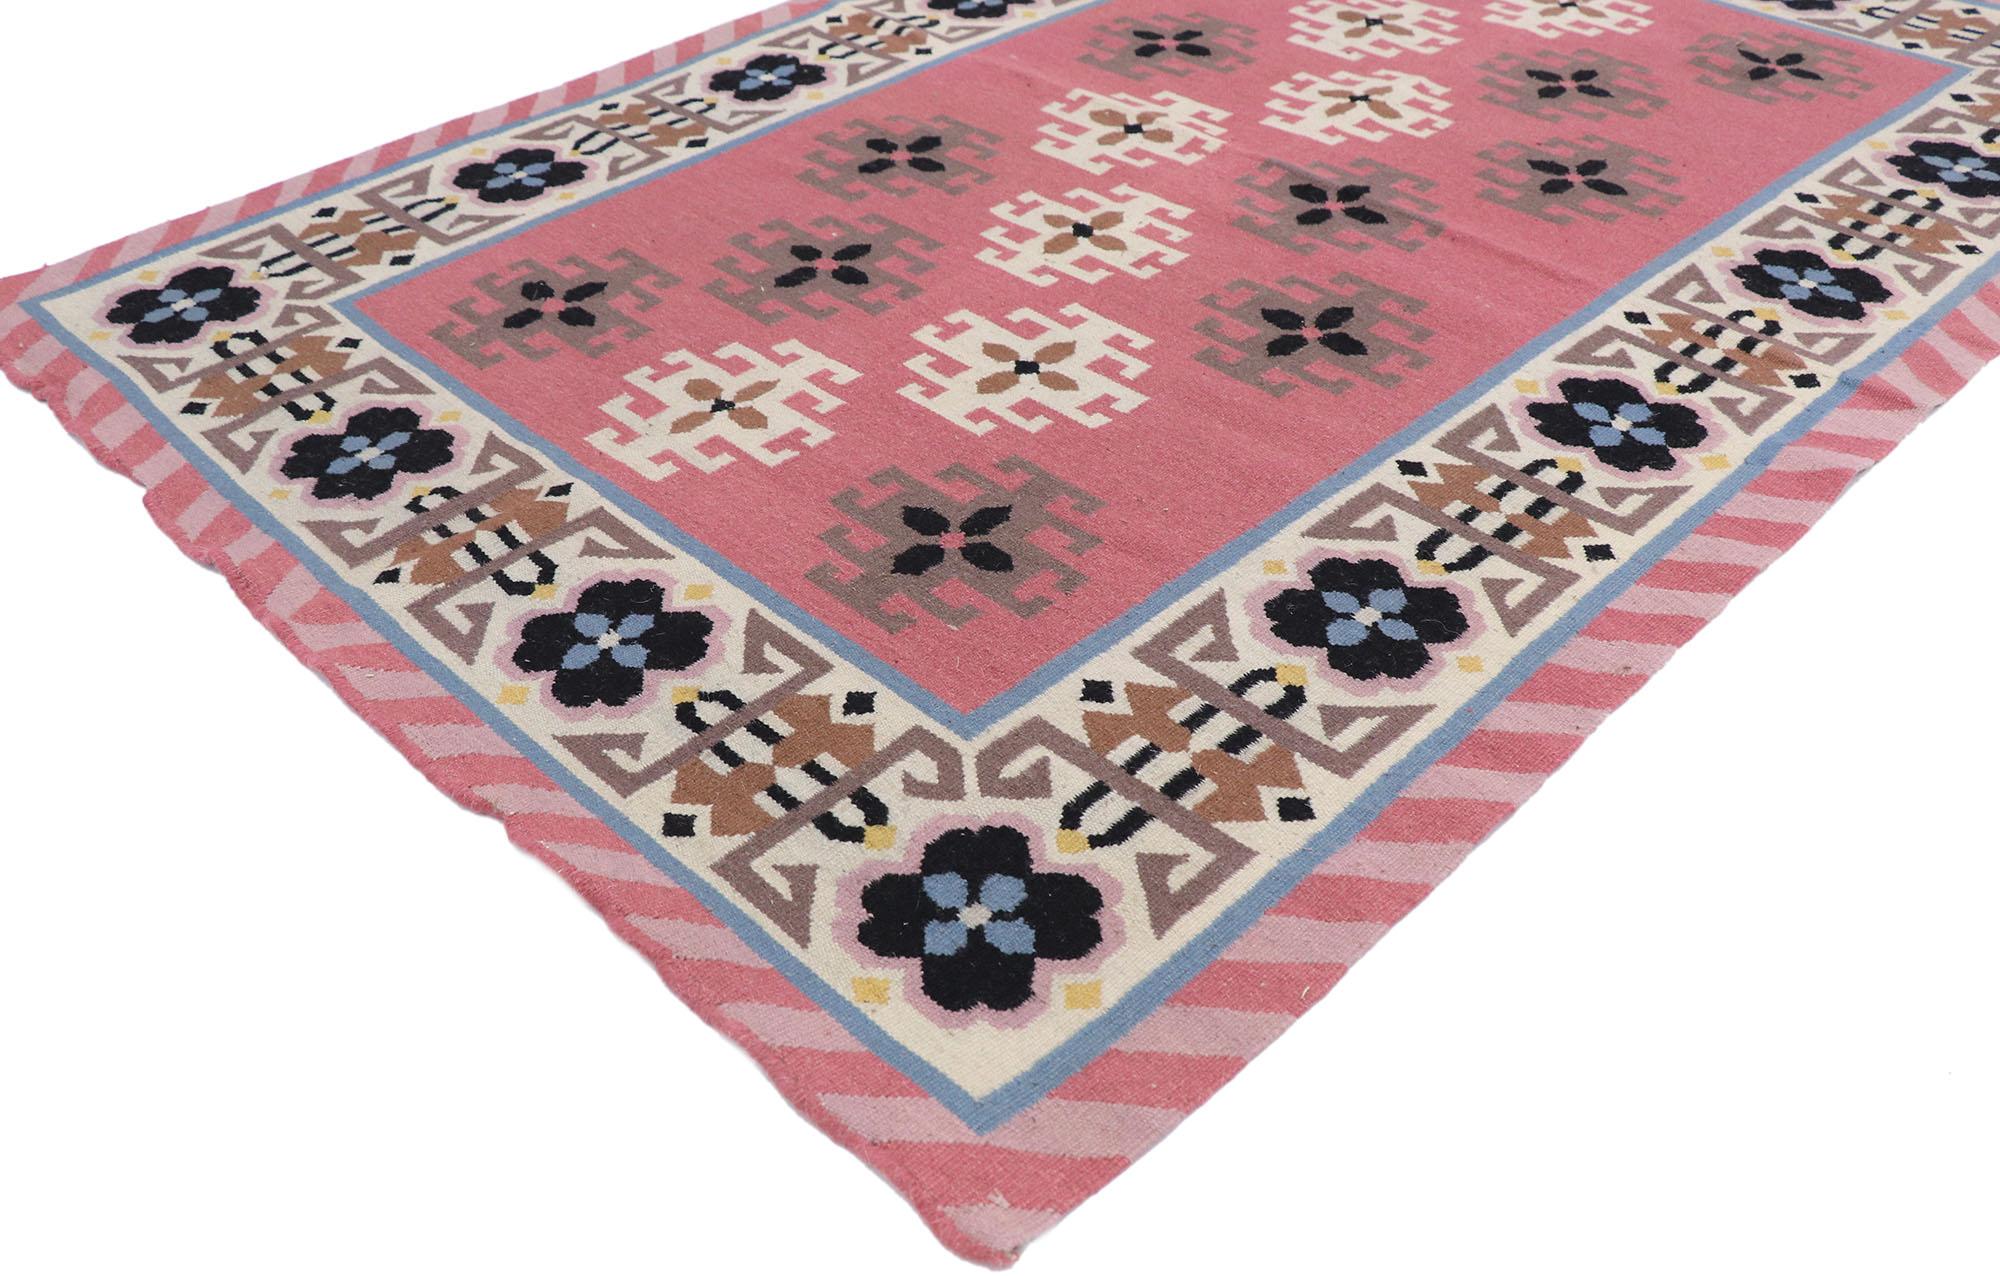 77811, vintage Romanian Geometric Kilim rug with boho chic Tribal style. Showcasing a bold expressive design, incredible detail and texture, this hand woven wool vintage Romanian Kilim rug is a captivating vision of woven beauty. The abrashed dark